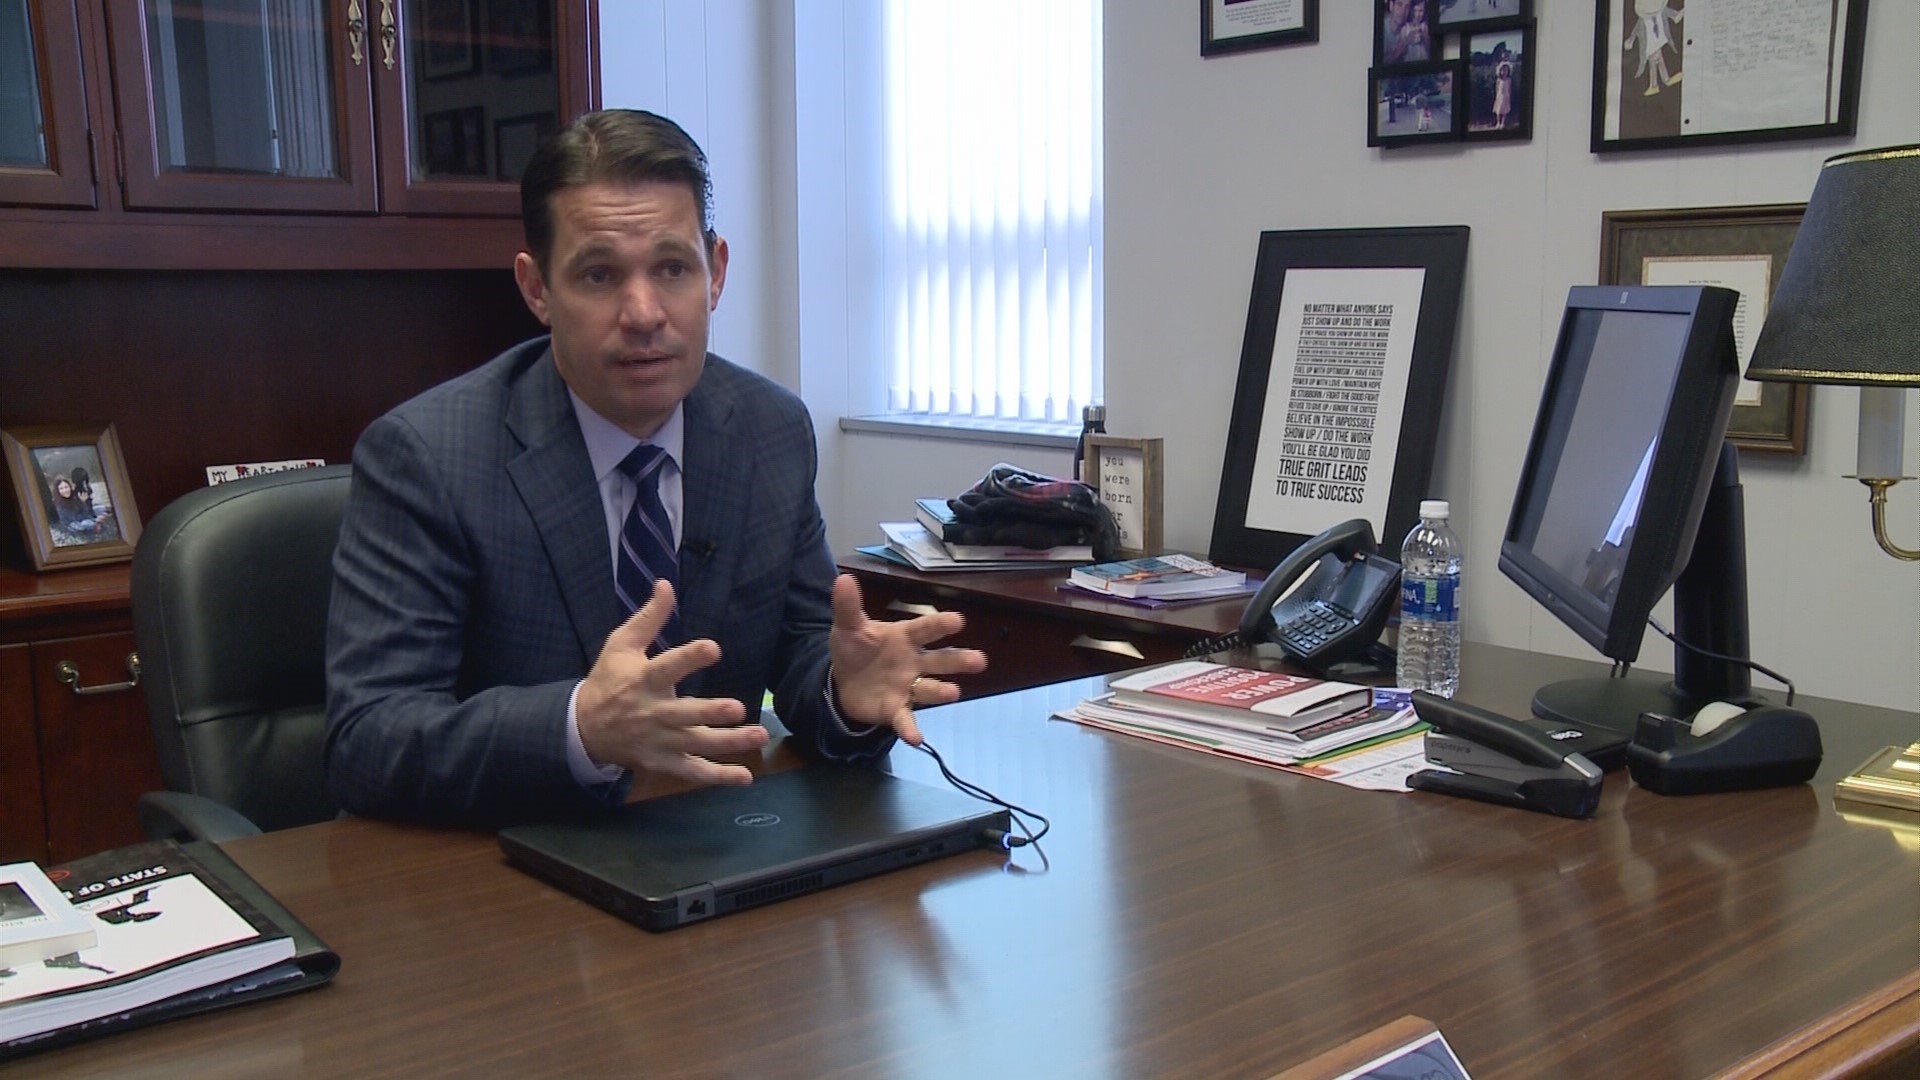 Superintendent Marty Pollio sent William Bennett a 23-page letter of termination on Dec. 16 following an investigation into the Aug. 23 incident.